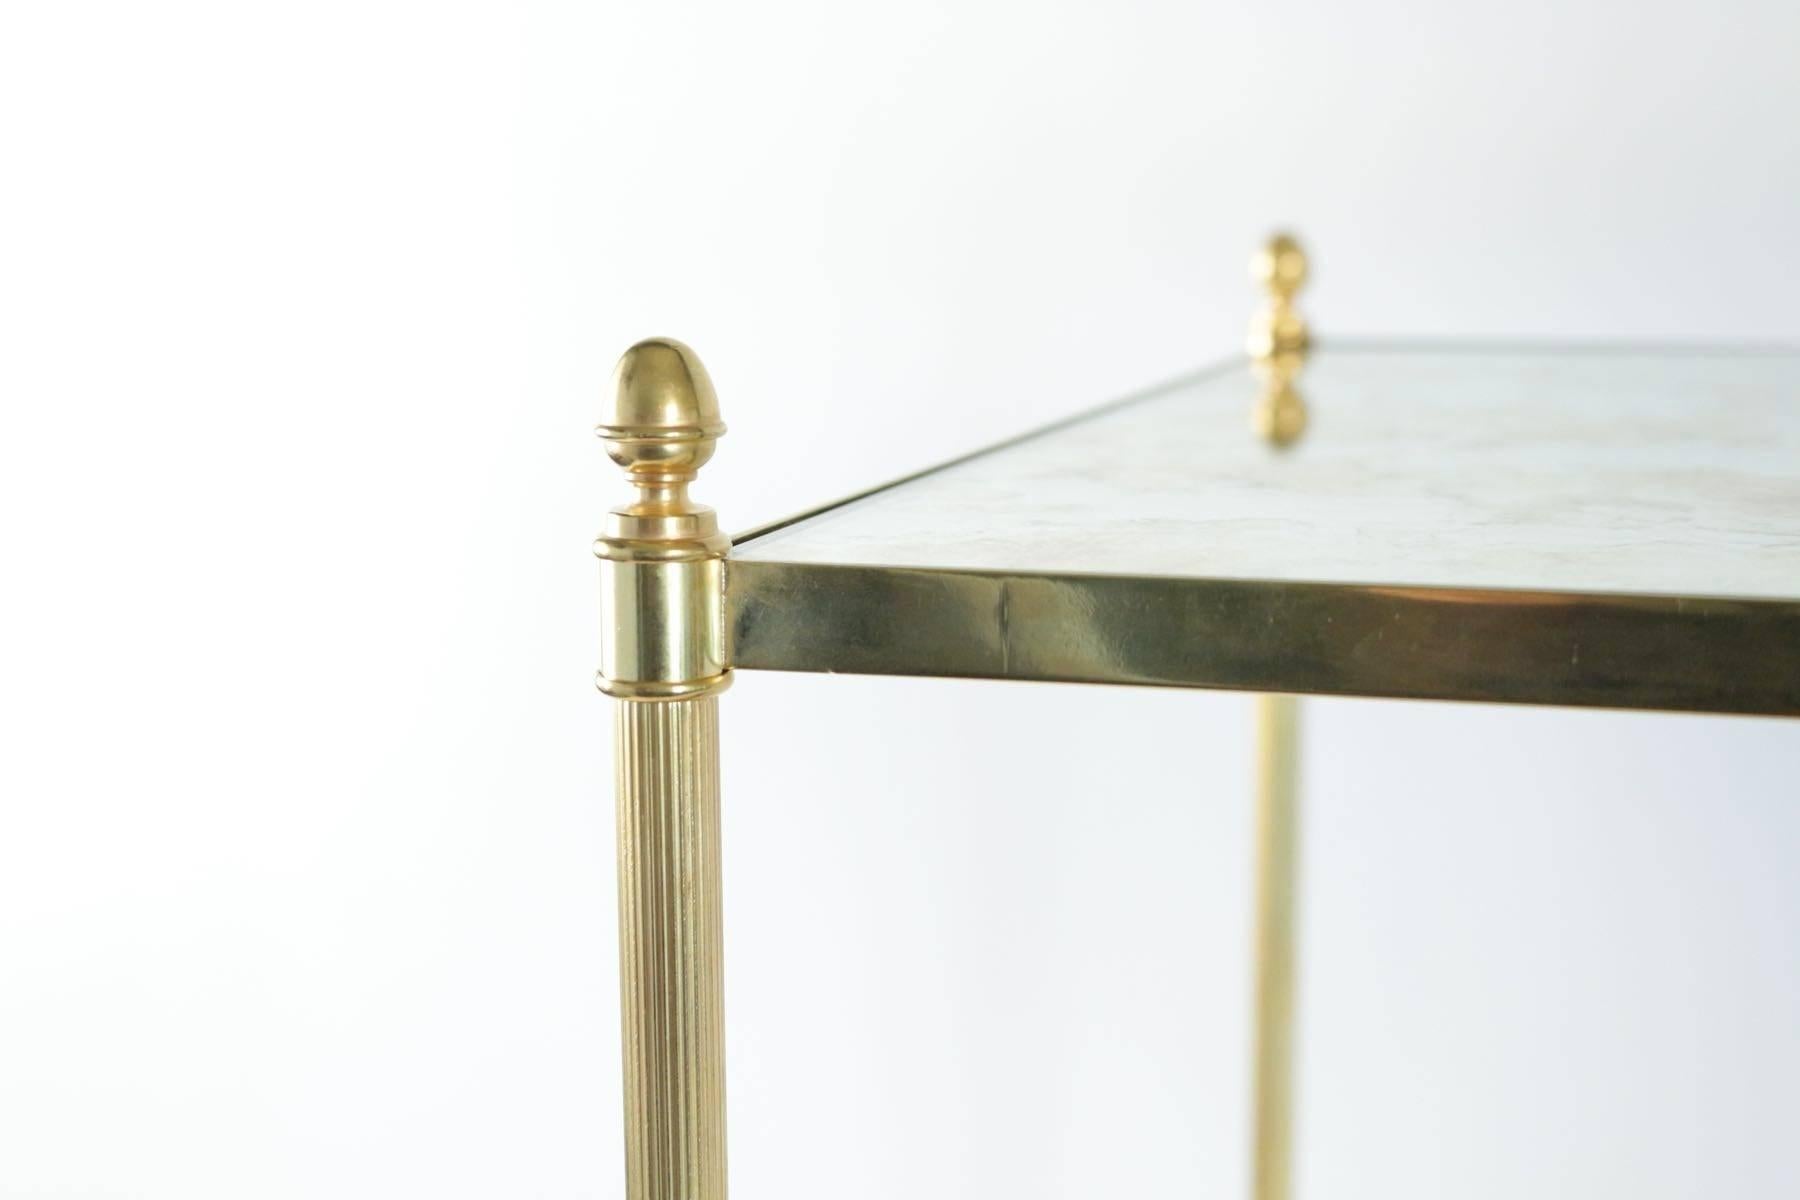 Louis XVI style
Gilt brass
Fluted feet
Oxidized mirror top
Work from 1970.